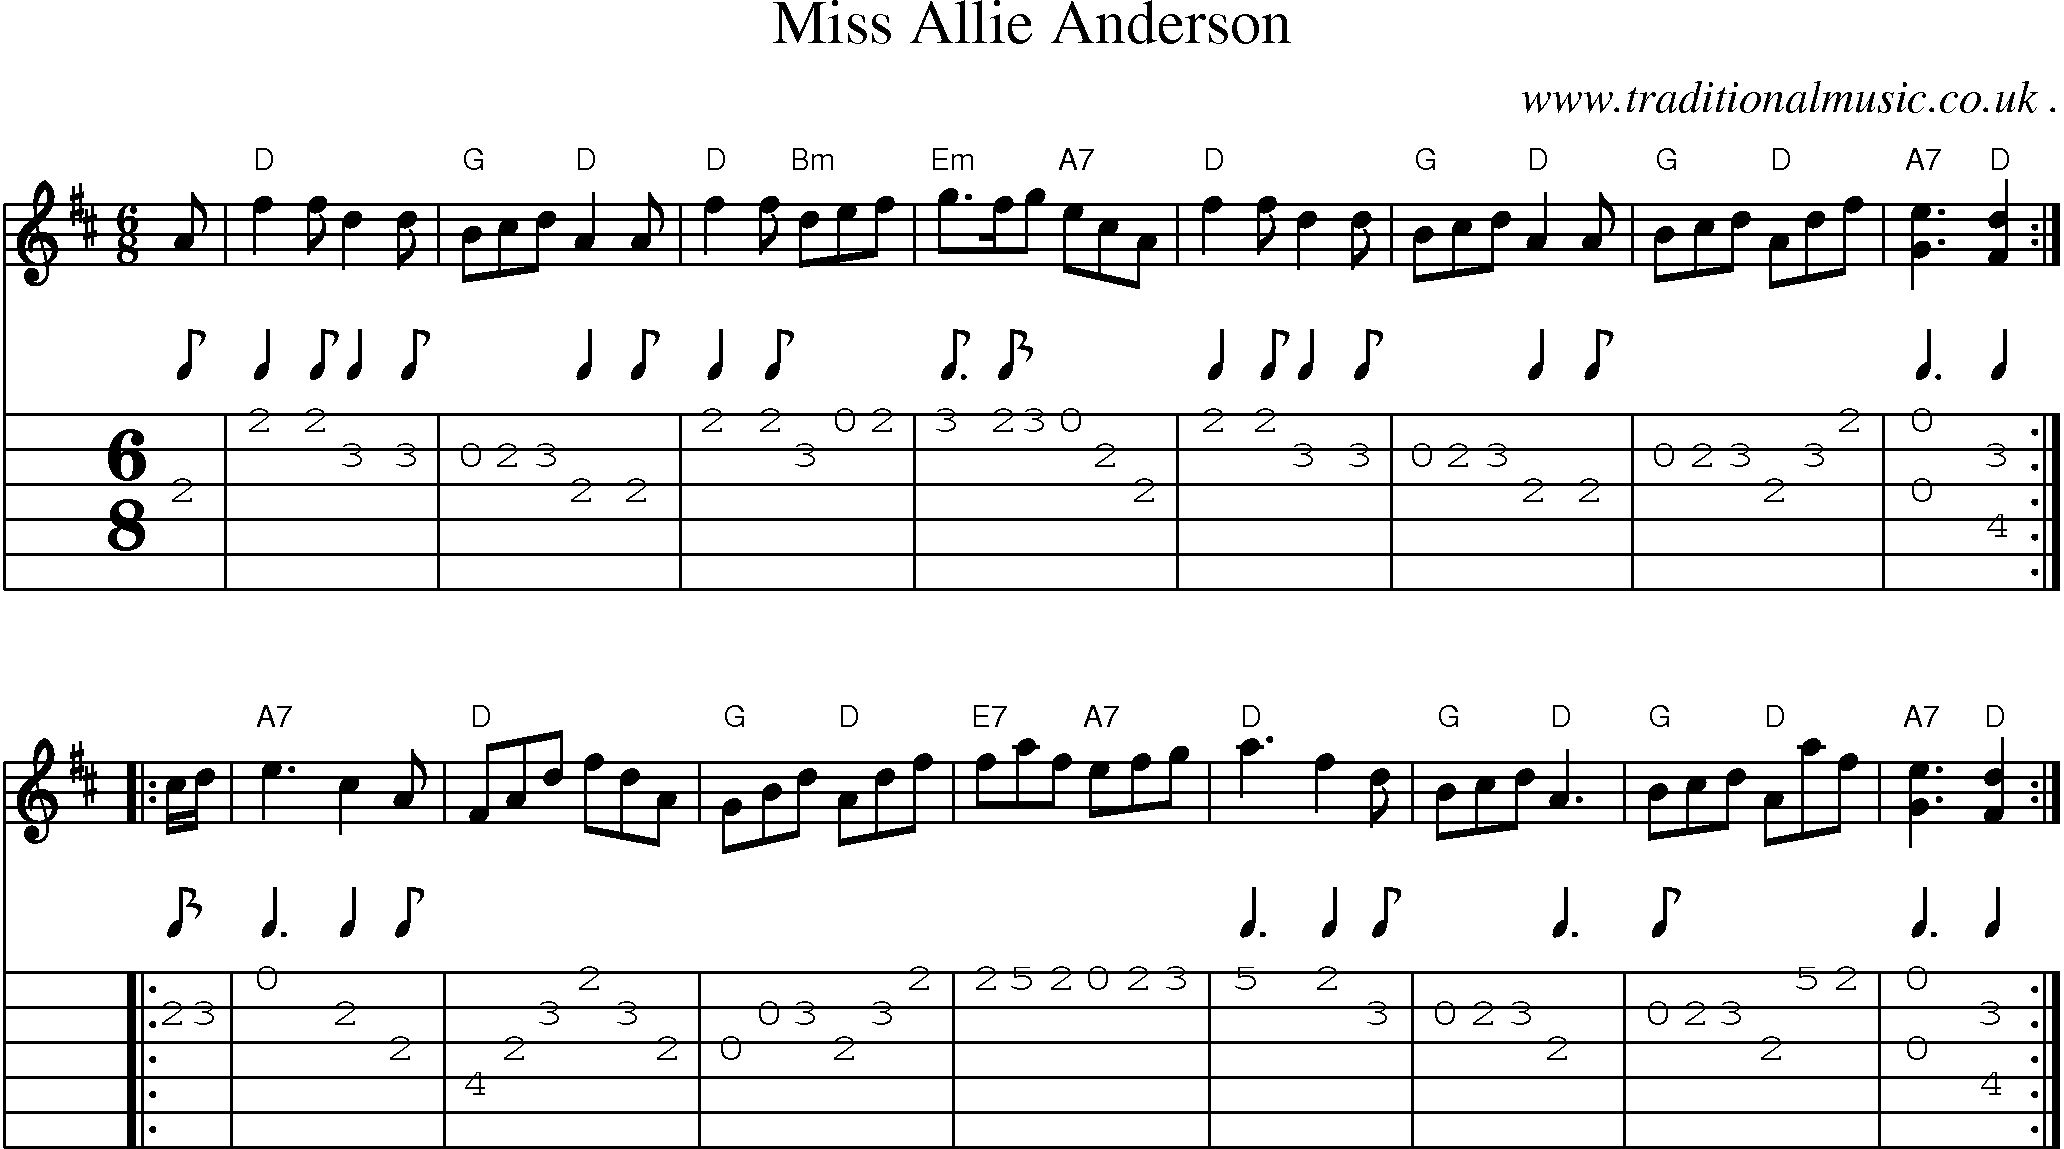 Sheet-music  score, Chords and Guitar Tabs for Miss Allie Anderson